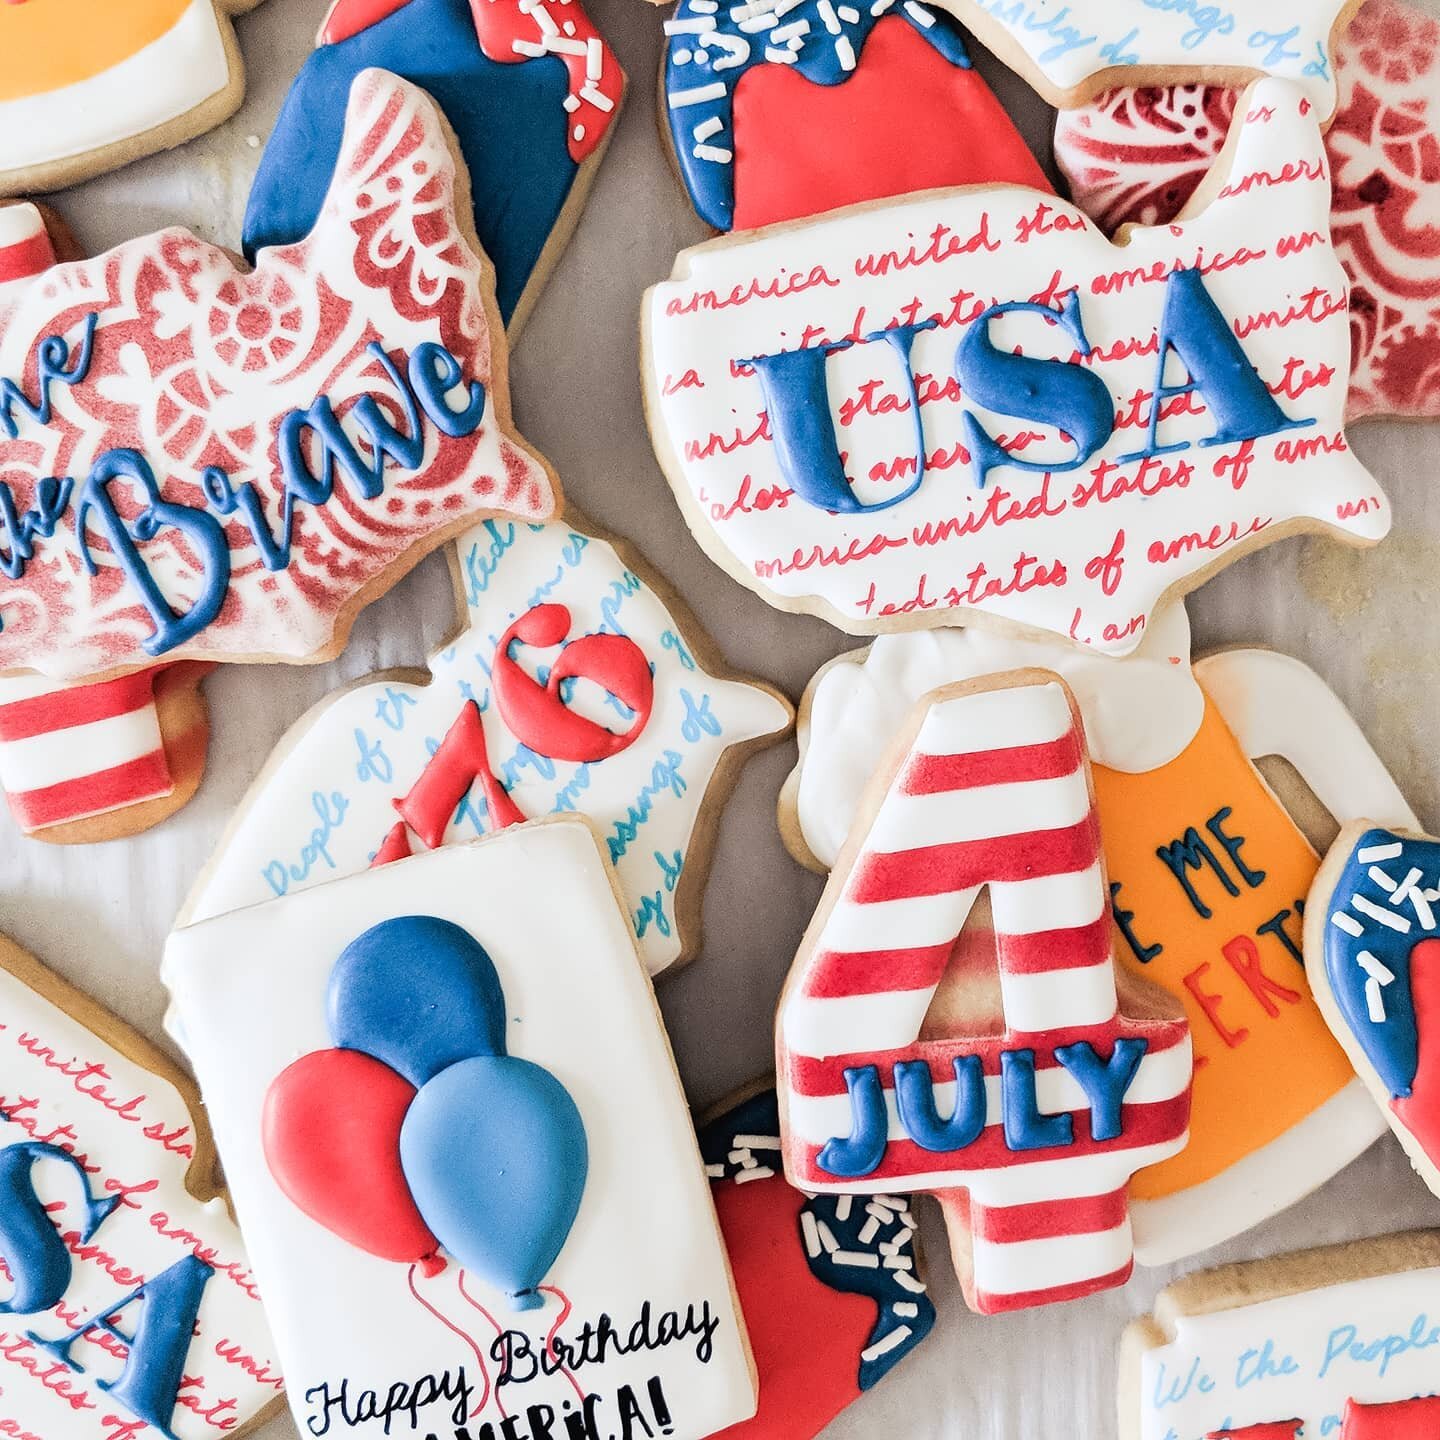 2019 was the first and probably the last time I will make cookies for the 4th of July (for sale).

I hate to say it guys, but its one of my least favorite holidays. 😬 Especially for making cookies. My creative juices aren't flowing.

That being said